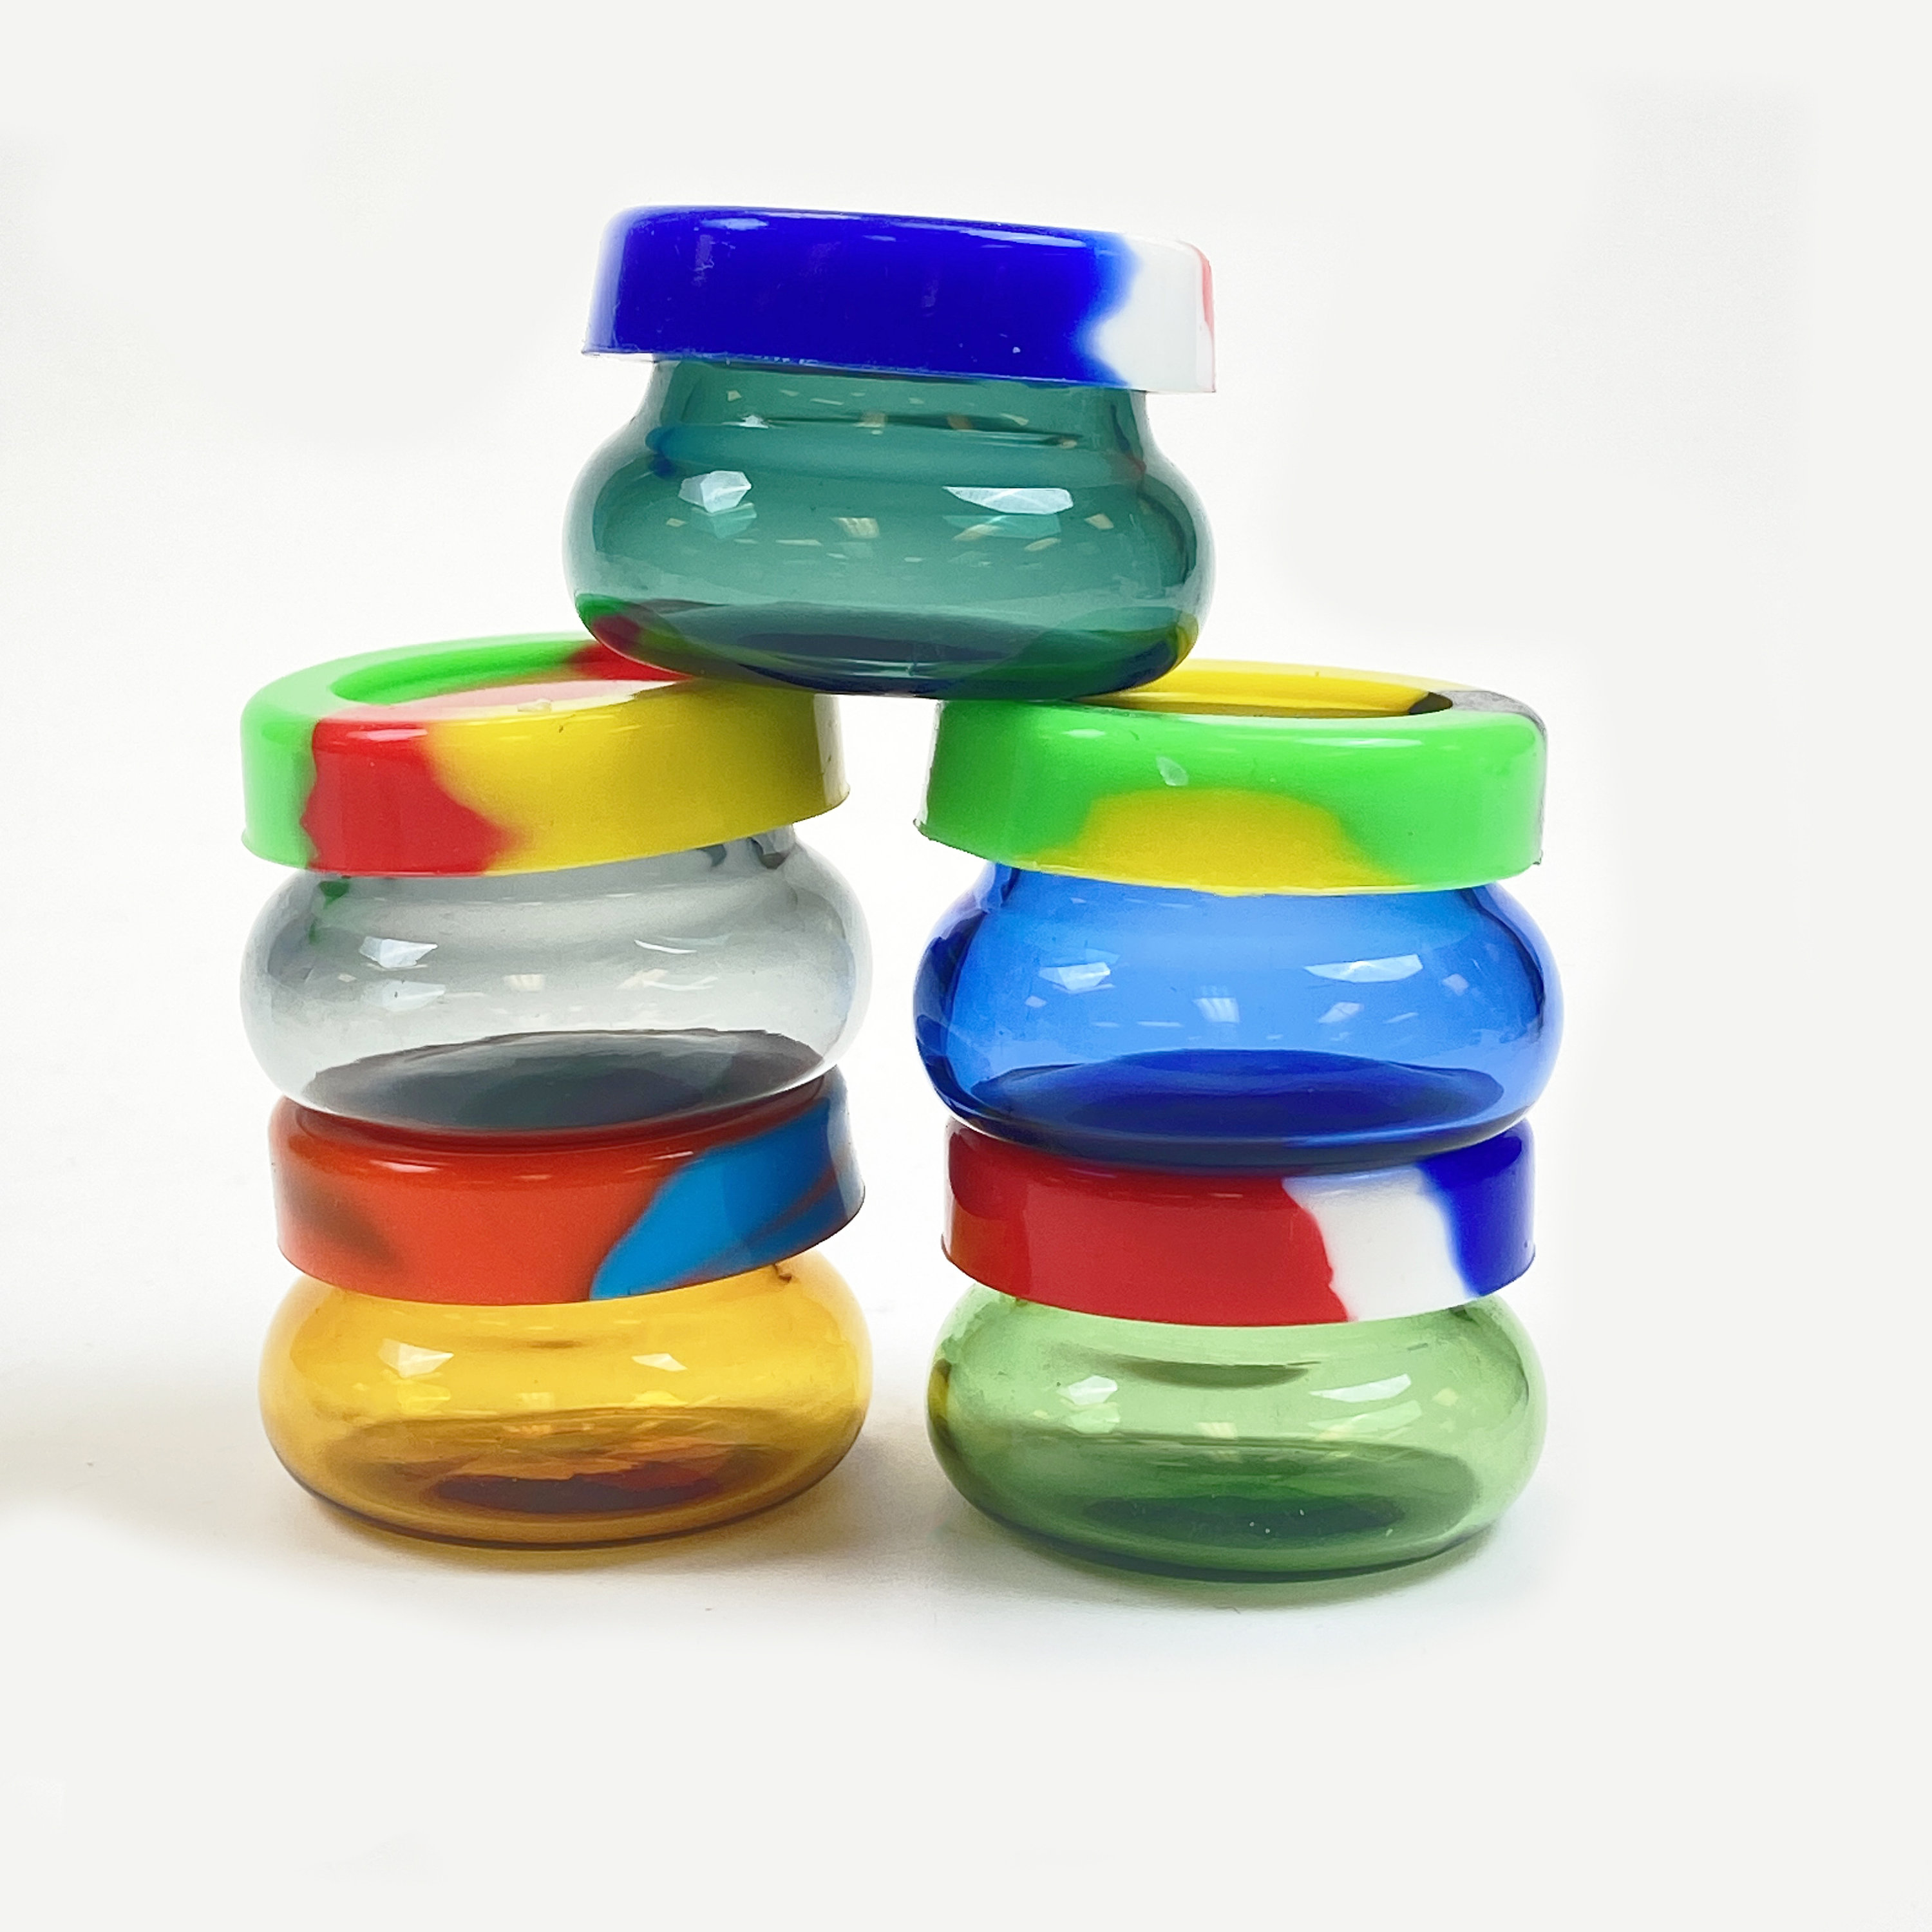 10Pcs 1ML Mini Silicone Wax Containers for Oil Slick Jar